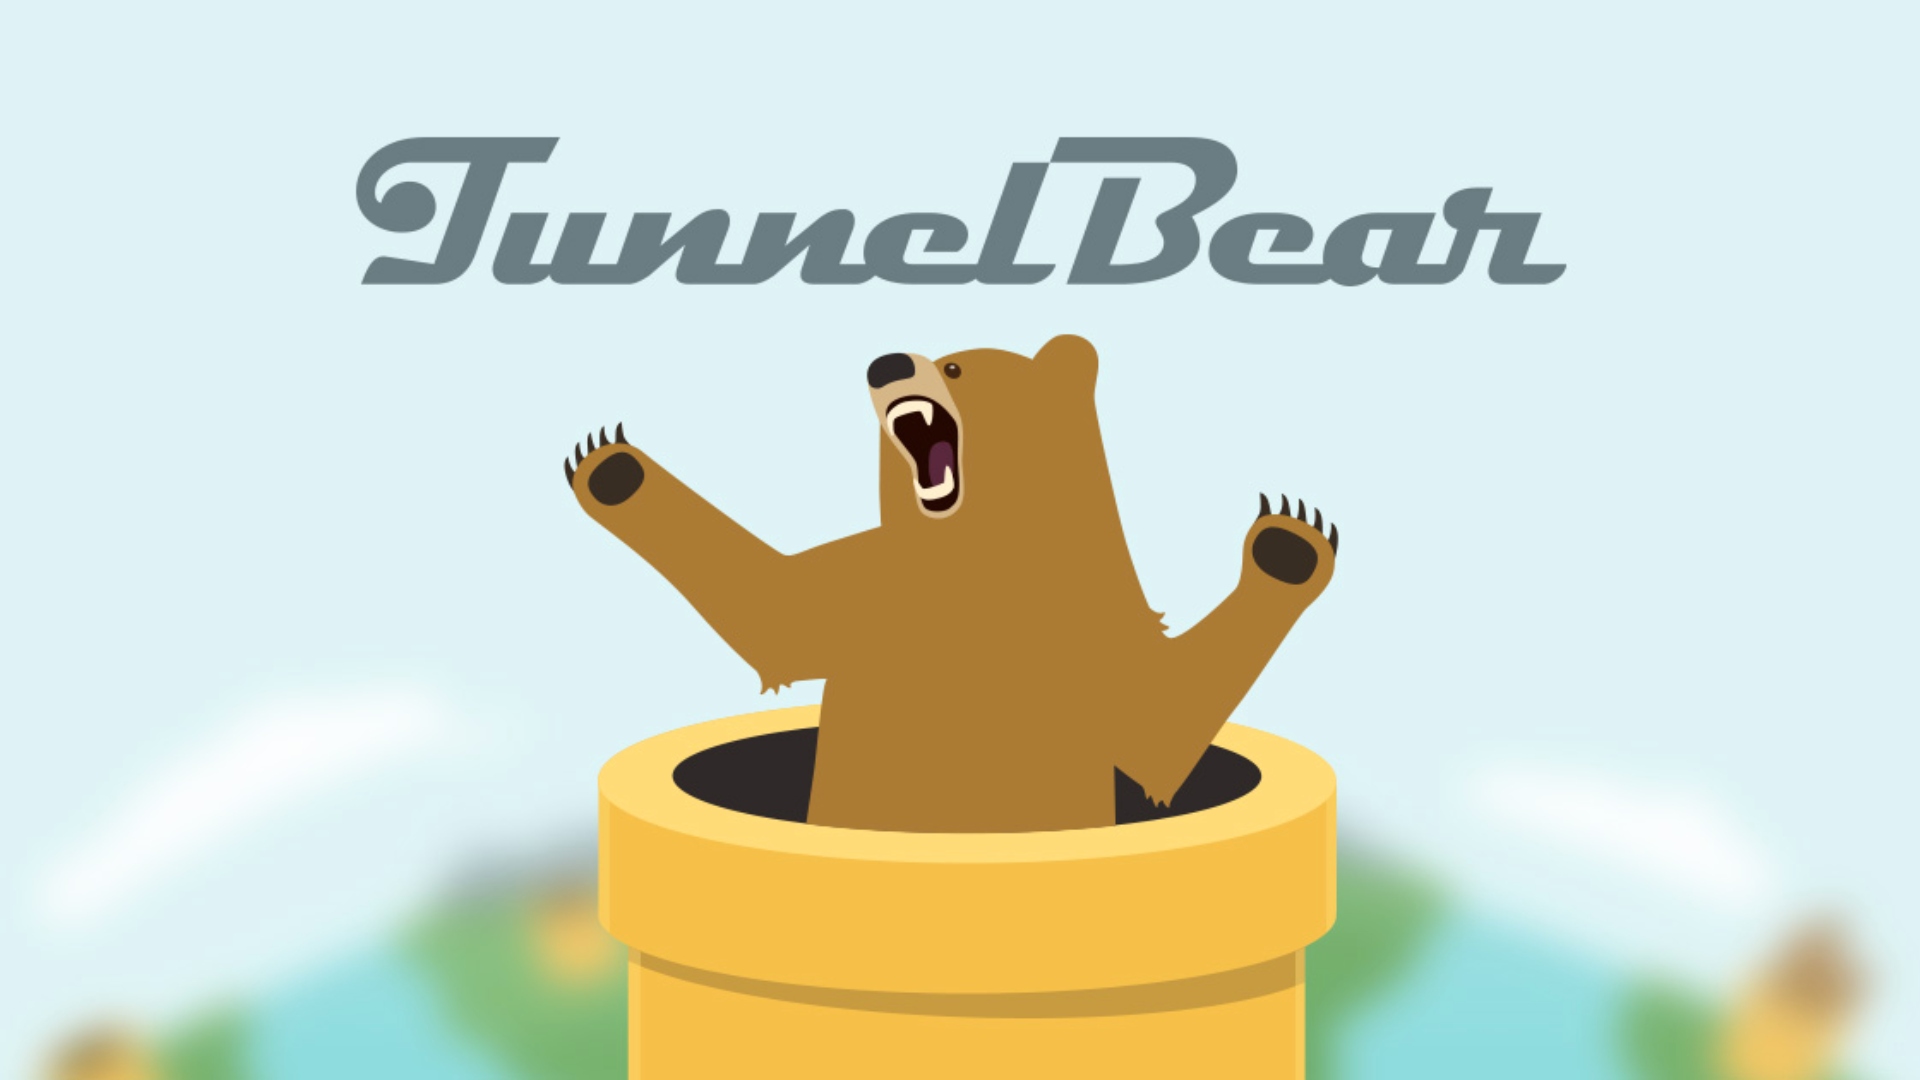 Best VPN for iPad - Tunnelbear. Image shows the business's logo, which has a bear coming out of a pipe.